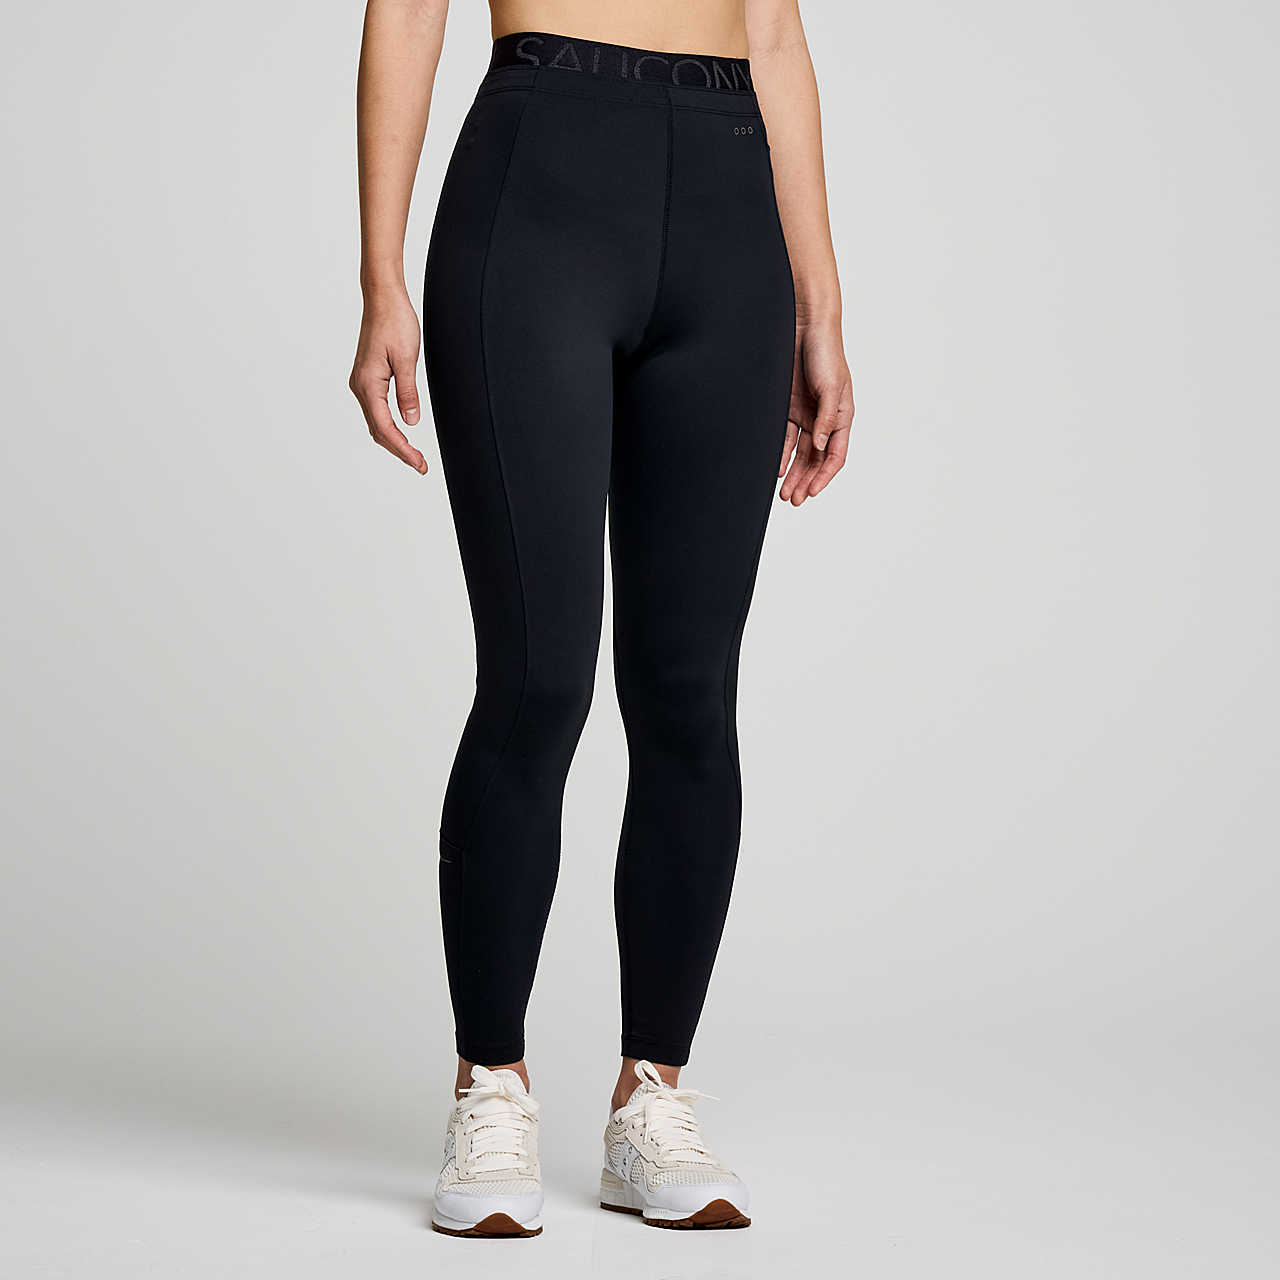 Women's Triumph Workout Tights | High Performance Compression Spandex